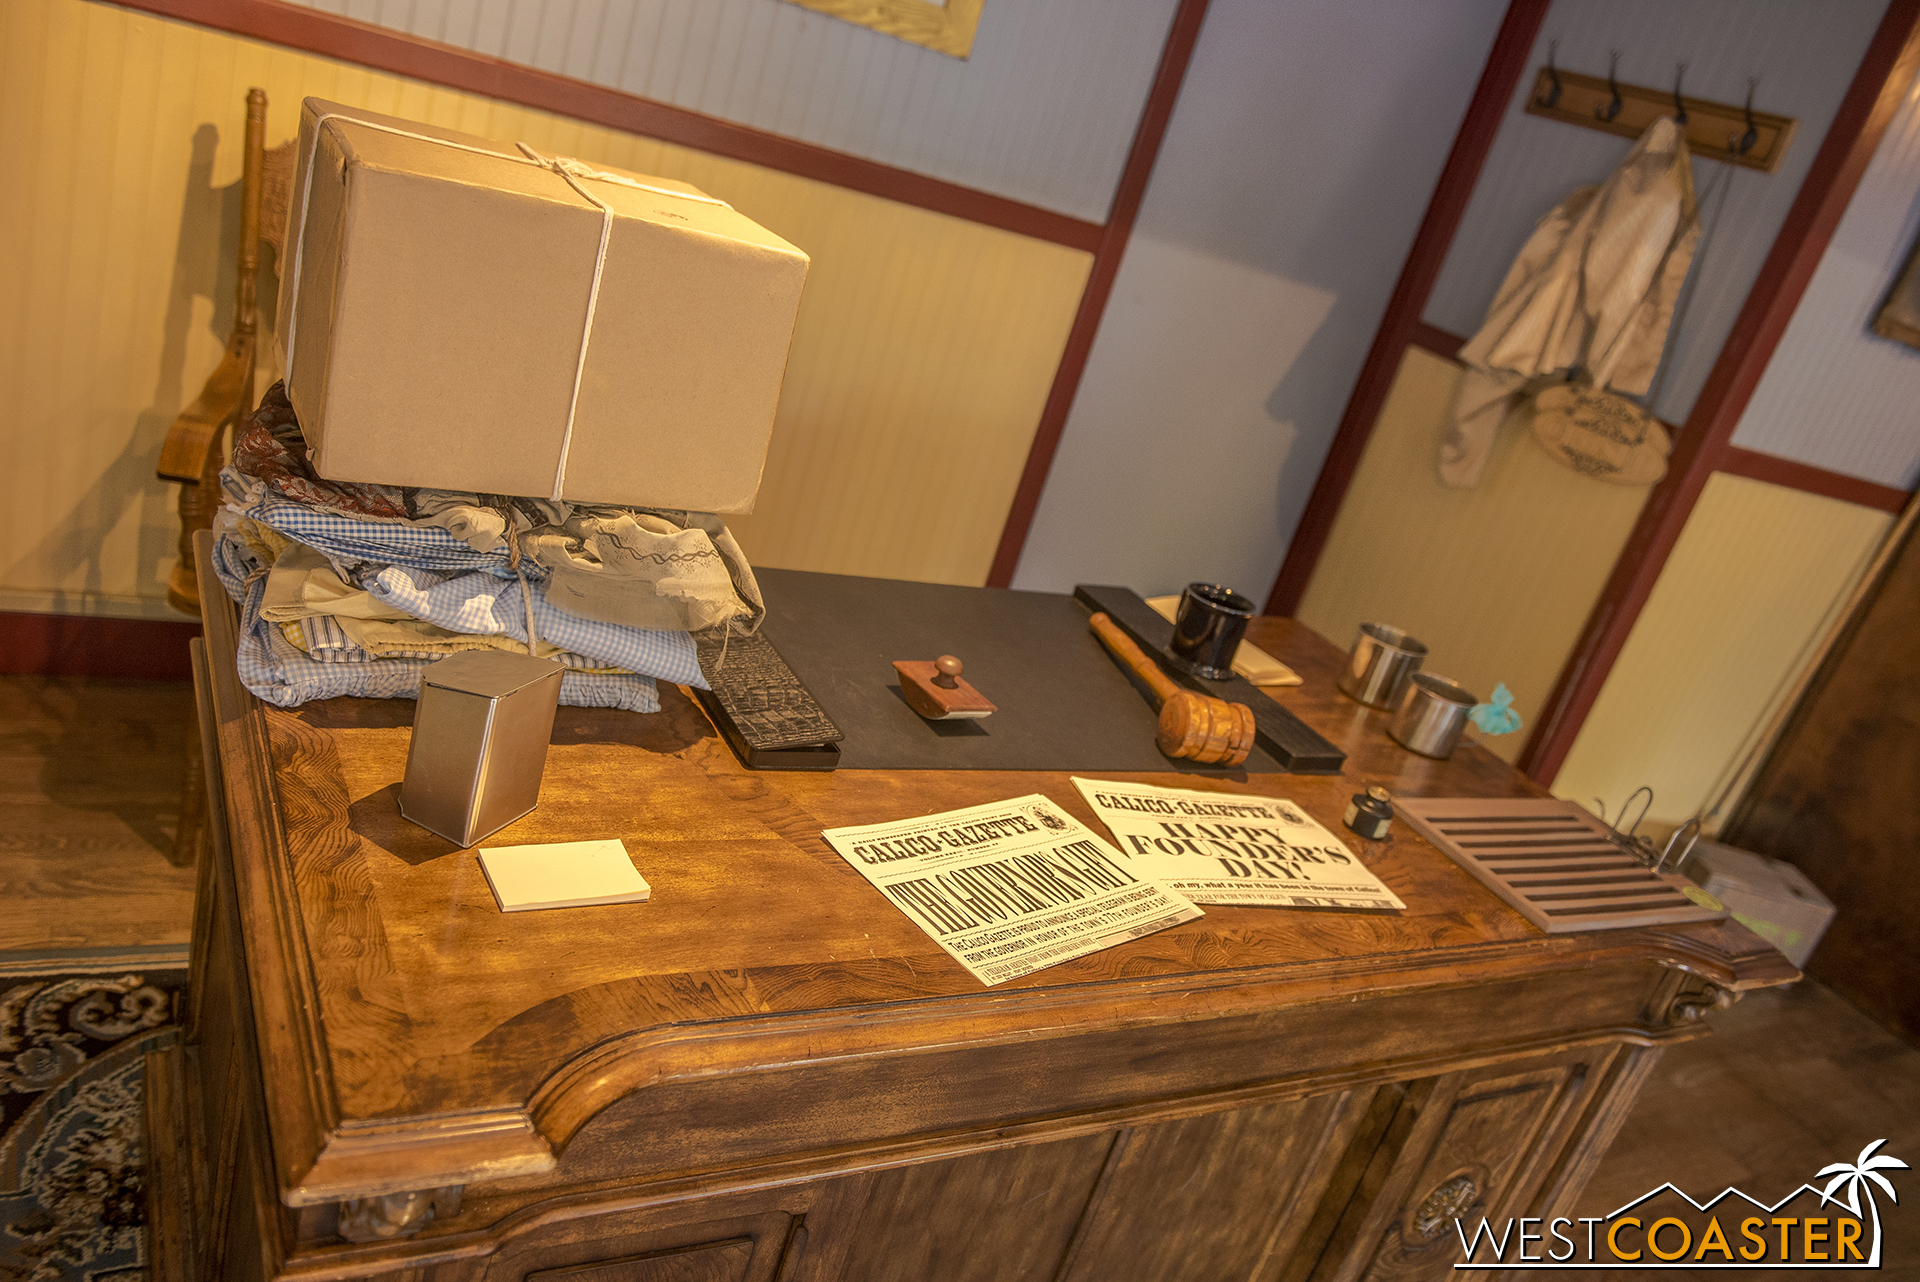  Guests can come in and interact with various Calico officials or take a look at some newly arrived artifacts. 